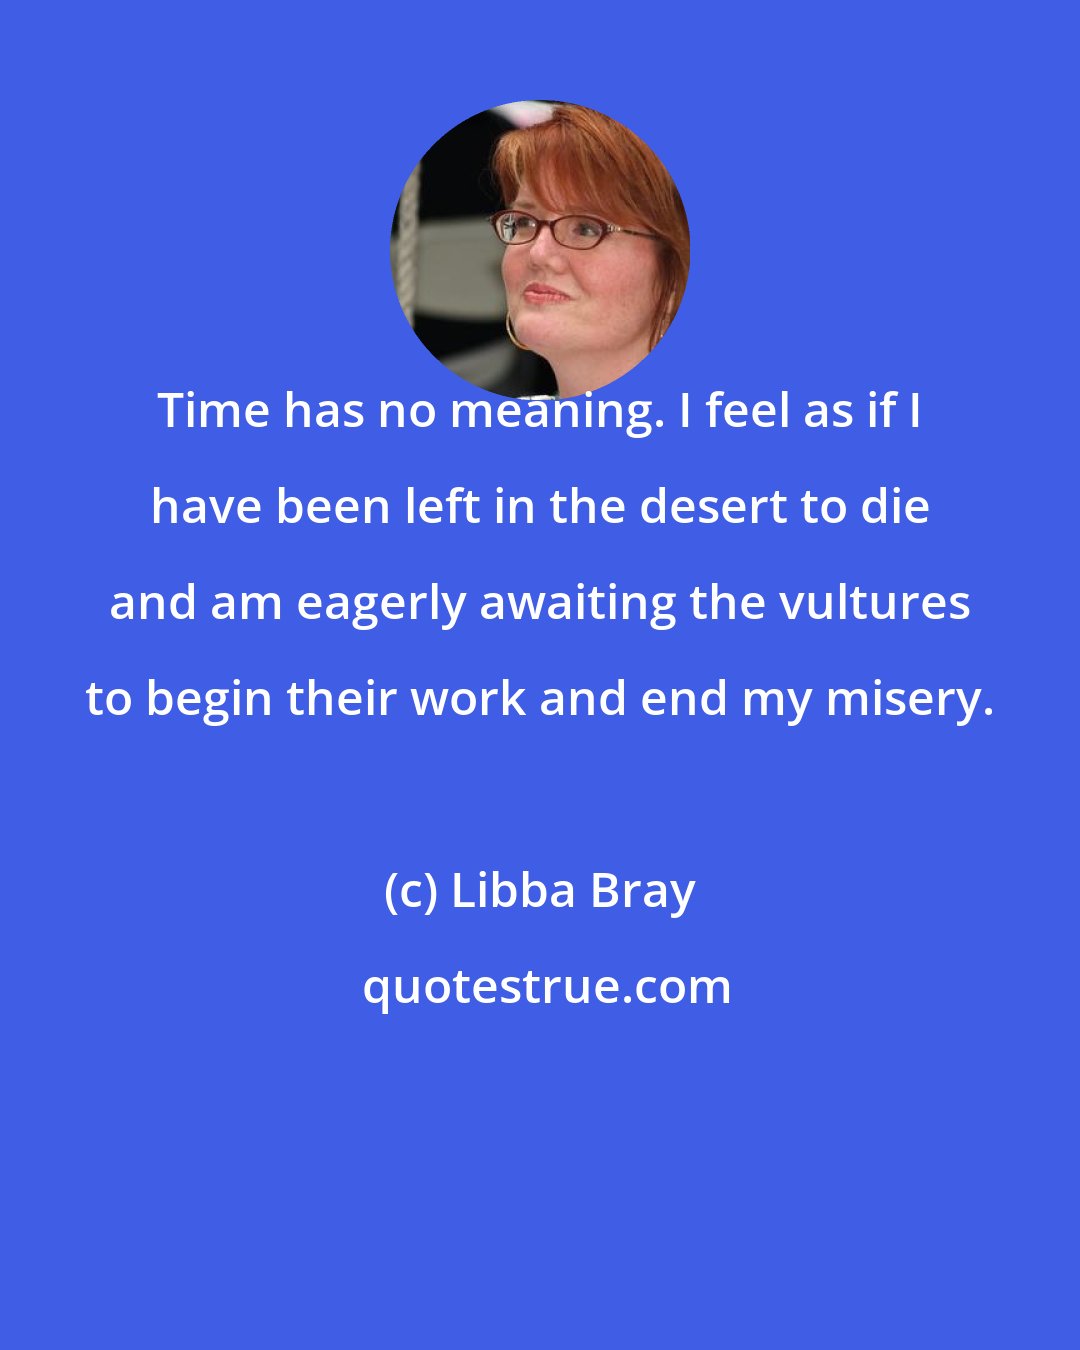 Libba Bray: Time has no meaning. I feel as if I have been left in the desert to die and am eagerly awaiting the vultures to begin their work and end my misery.